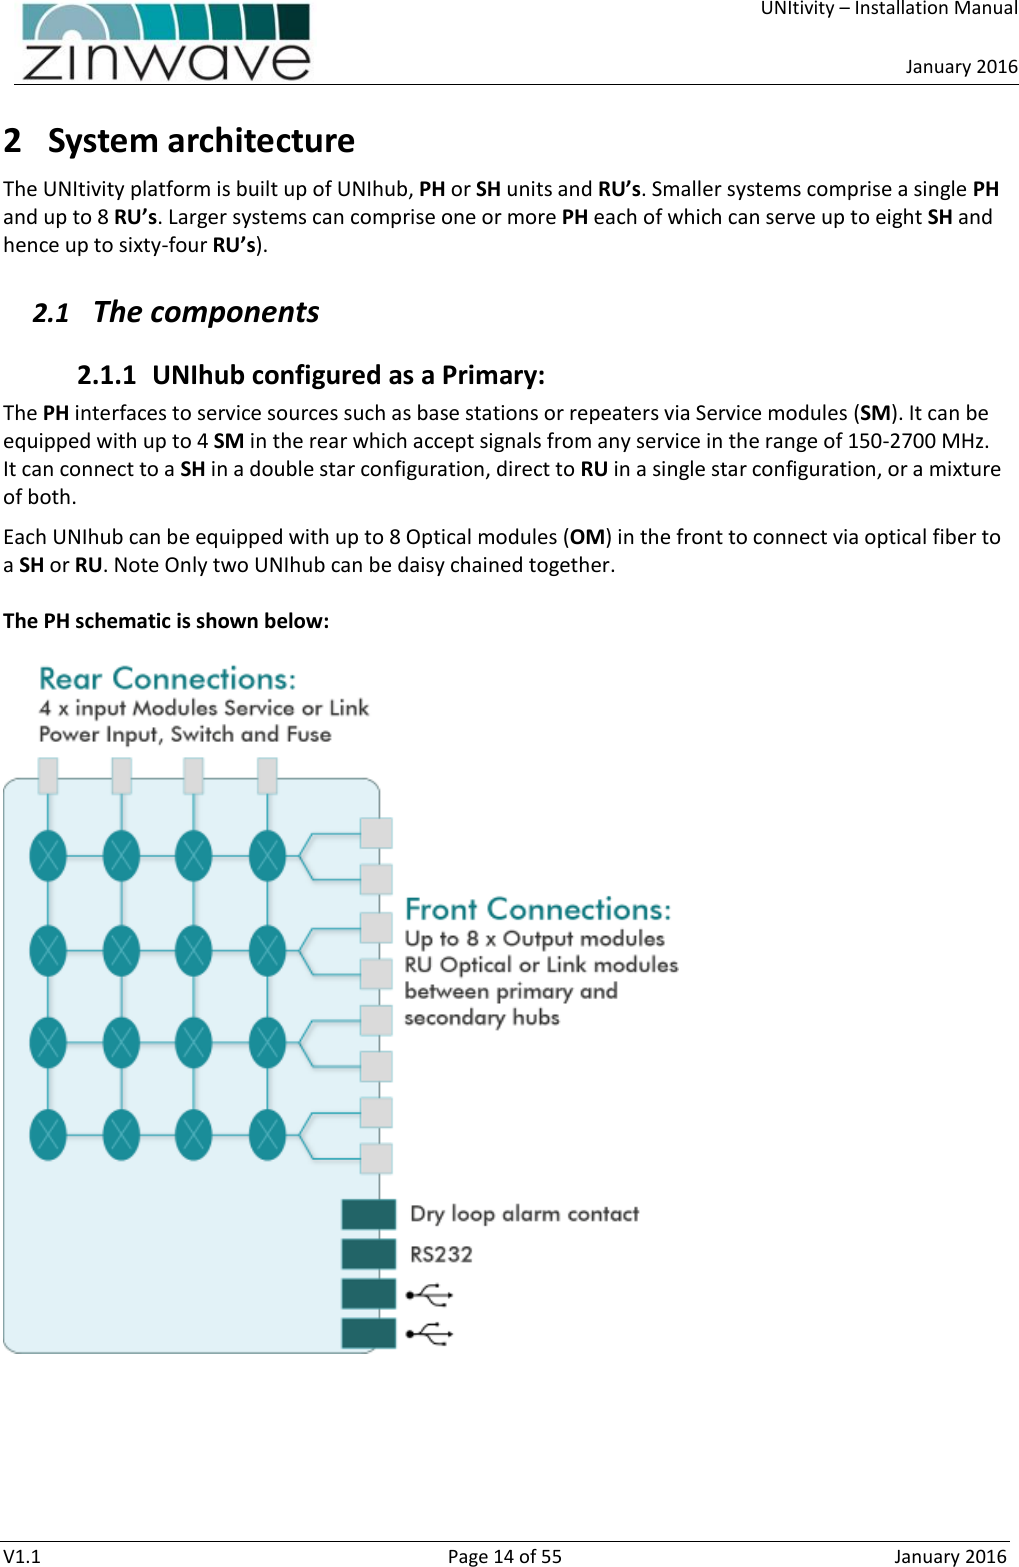     UNItivity – Installation Manual      January 2016  V1.1  Page 14 of 55  January 2016 2 System architecture The UNItivity platform is built up of UNIhub, PH or SH units and RU’s. Smaller systems comprise a single PH and up to 8 RU’s. Larger systems can comprise one or more PH each of which can serve up to eight SH and hence up to sixty-four RU’s).  2.1 The components 2.1.1 UNIhub configured as a Primary:  The PH interfaces to service sources such as base stations or repeaters via Service modules (SM). It can be equipped with up to 4 SM in the rear which accept signals from any service in the range of 150-2700 MHz. It can connect to a SH in a double star configuration, direct to RU in a single star configuration, or a mixture of both. Each UNIhub can be equipped with up to 8 Optical modules (OM) in the front to connect via optical fiber to a SH or RU. Note Only two UNIhub can be daisy chained together.   The PH schematic is shown below:   